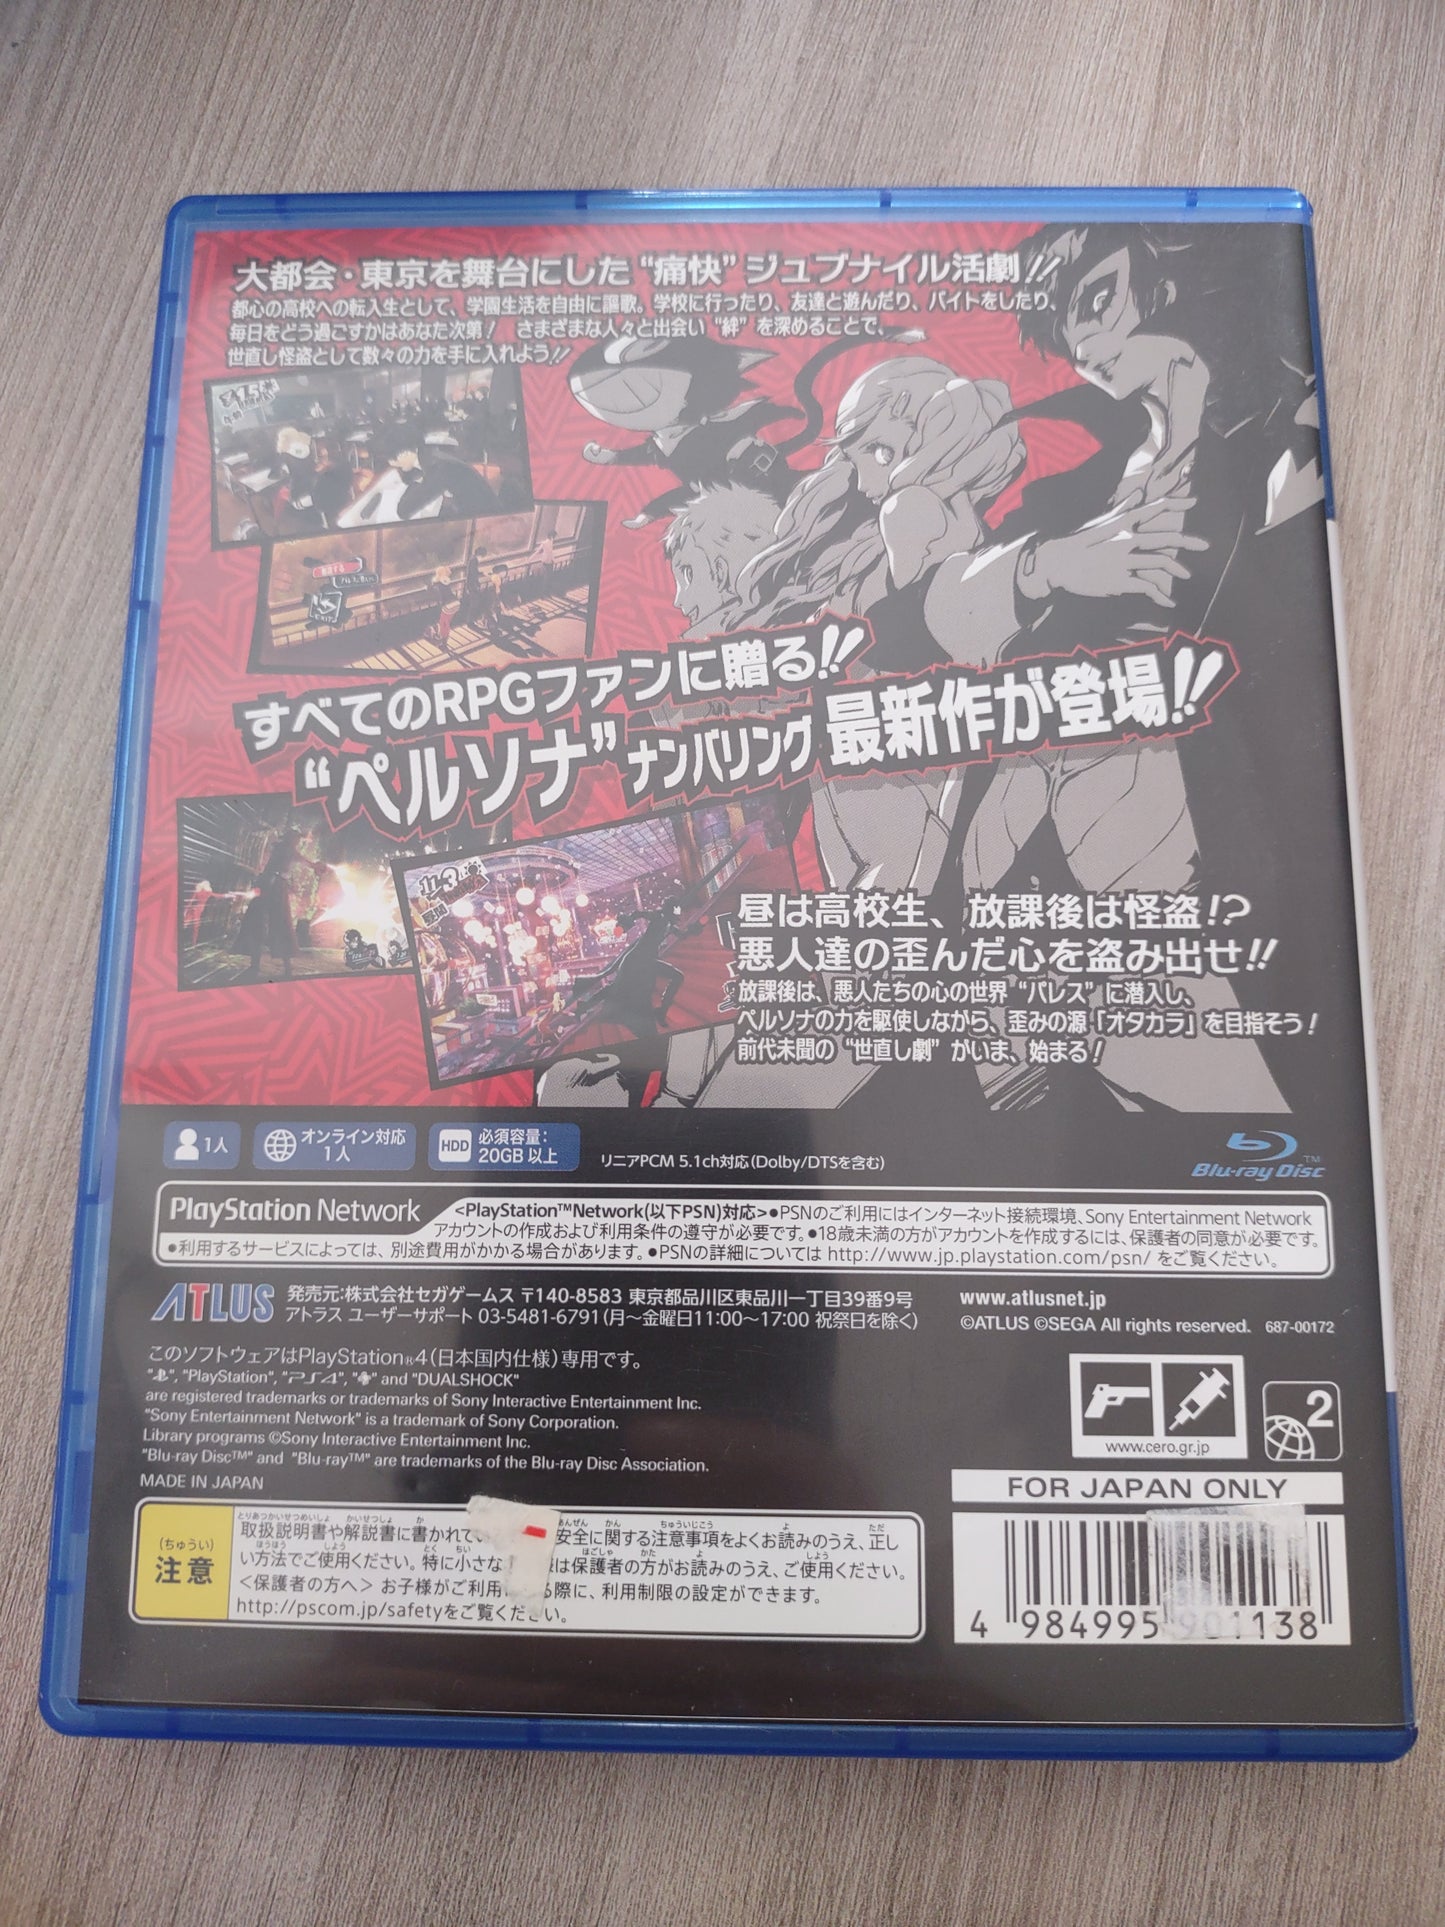 Gioco PS4 persona 5 Japan game atlus PlayStation 4